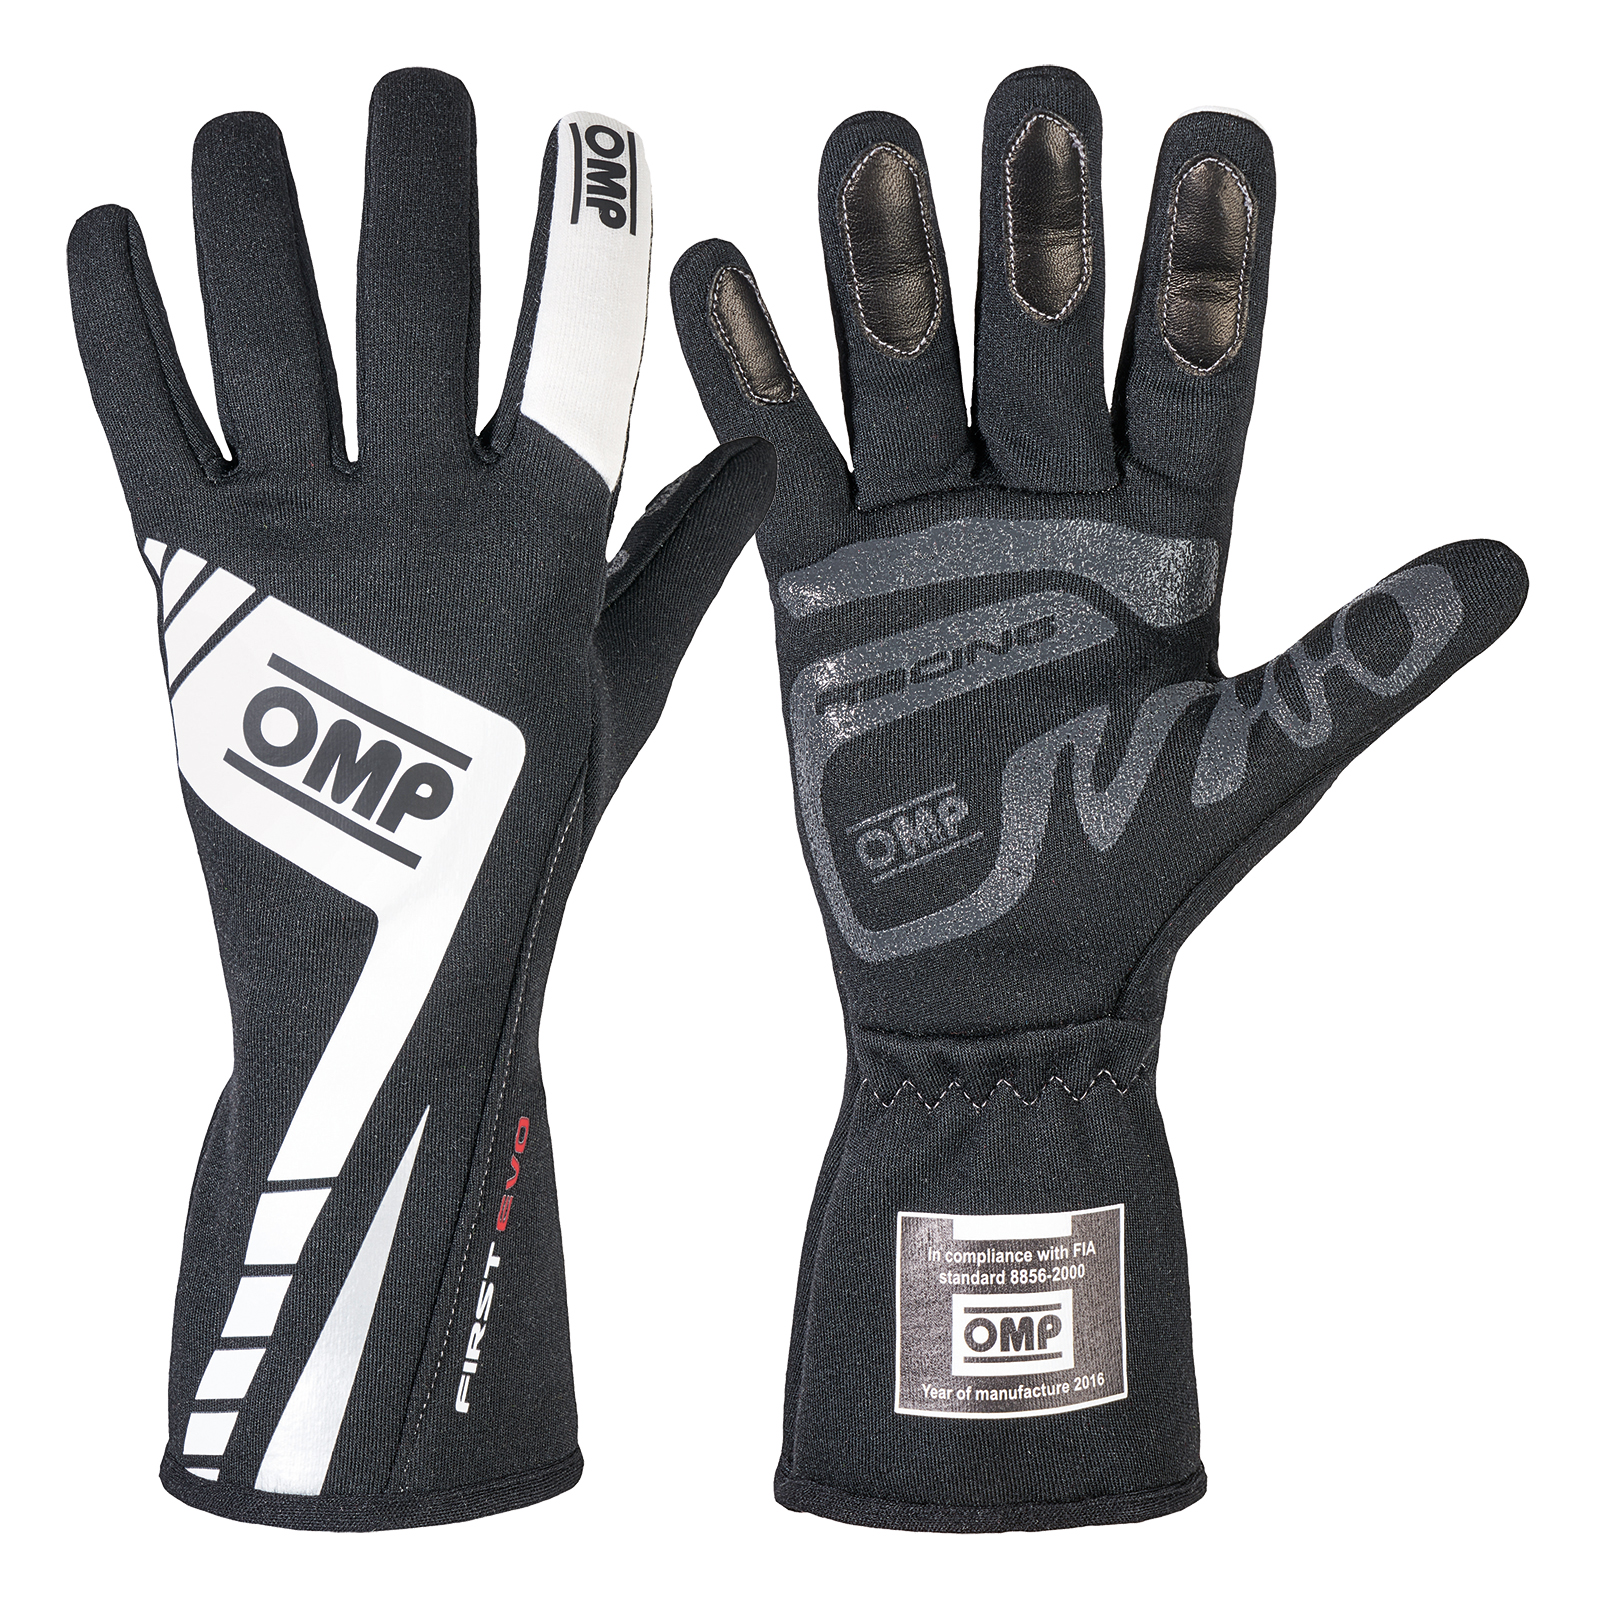 OMP First Evo Gloves | OMP First Evo Racing Gloves | OMP Rally Driver ...